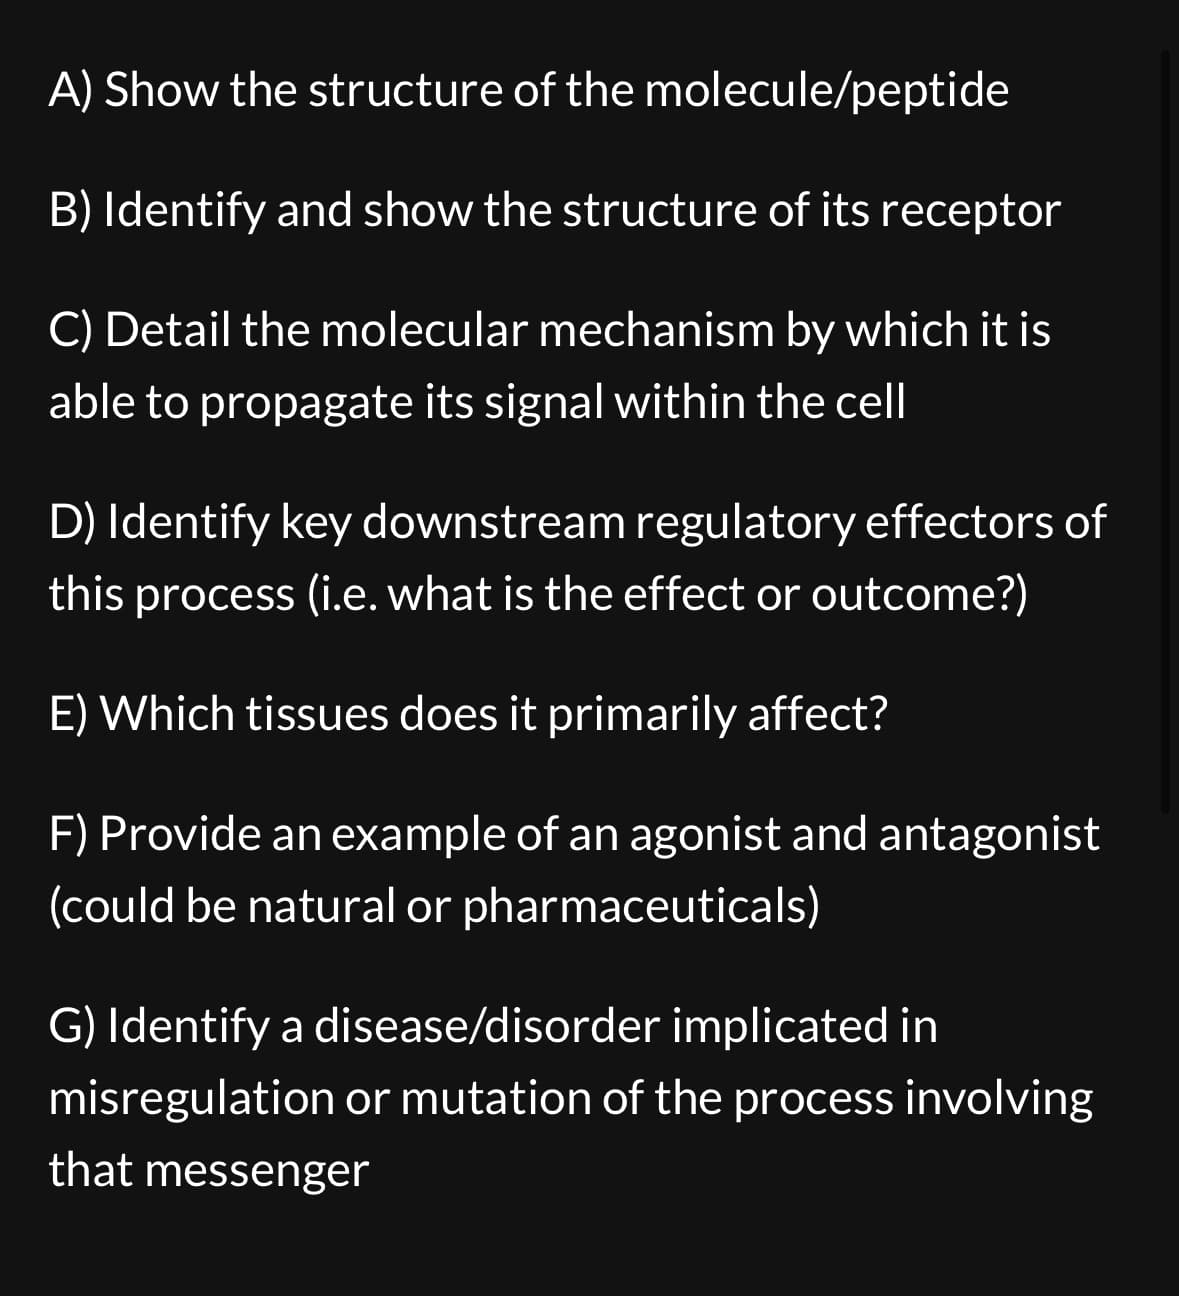 A) Show the structure of the molecule/peptide
B) Identify and show the structure of its receptor
C) Detail the molecular mechanism by which it is
able to propagate its signal within the cell
D) Identify key downstream regulatory effectors of
this process (i.e. what is the effect or outcome?)
E) Which tissues does it primarily affect?
F) Provide an example of an agonist and antagonist
(could be natural or pharmaceuticals)
G) Identify a disease/disorder implicated in
misregulation or mutation of the process involving
that messenger